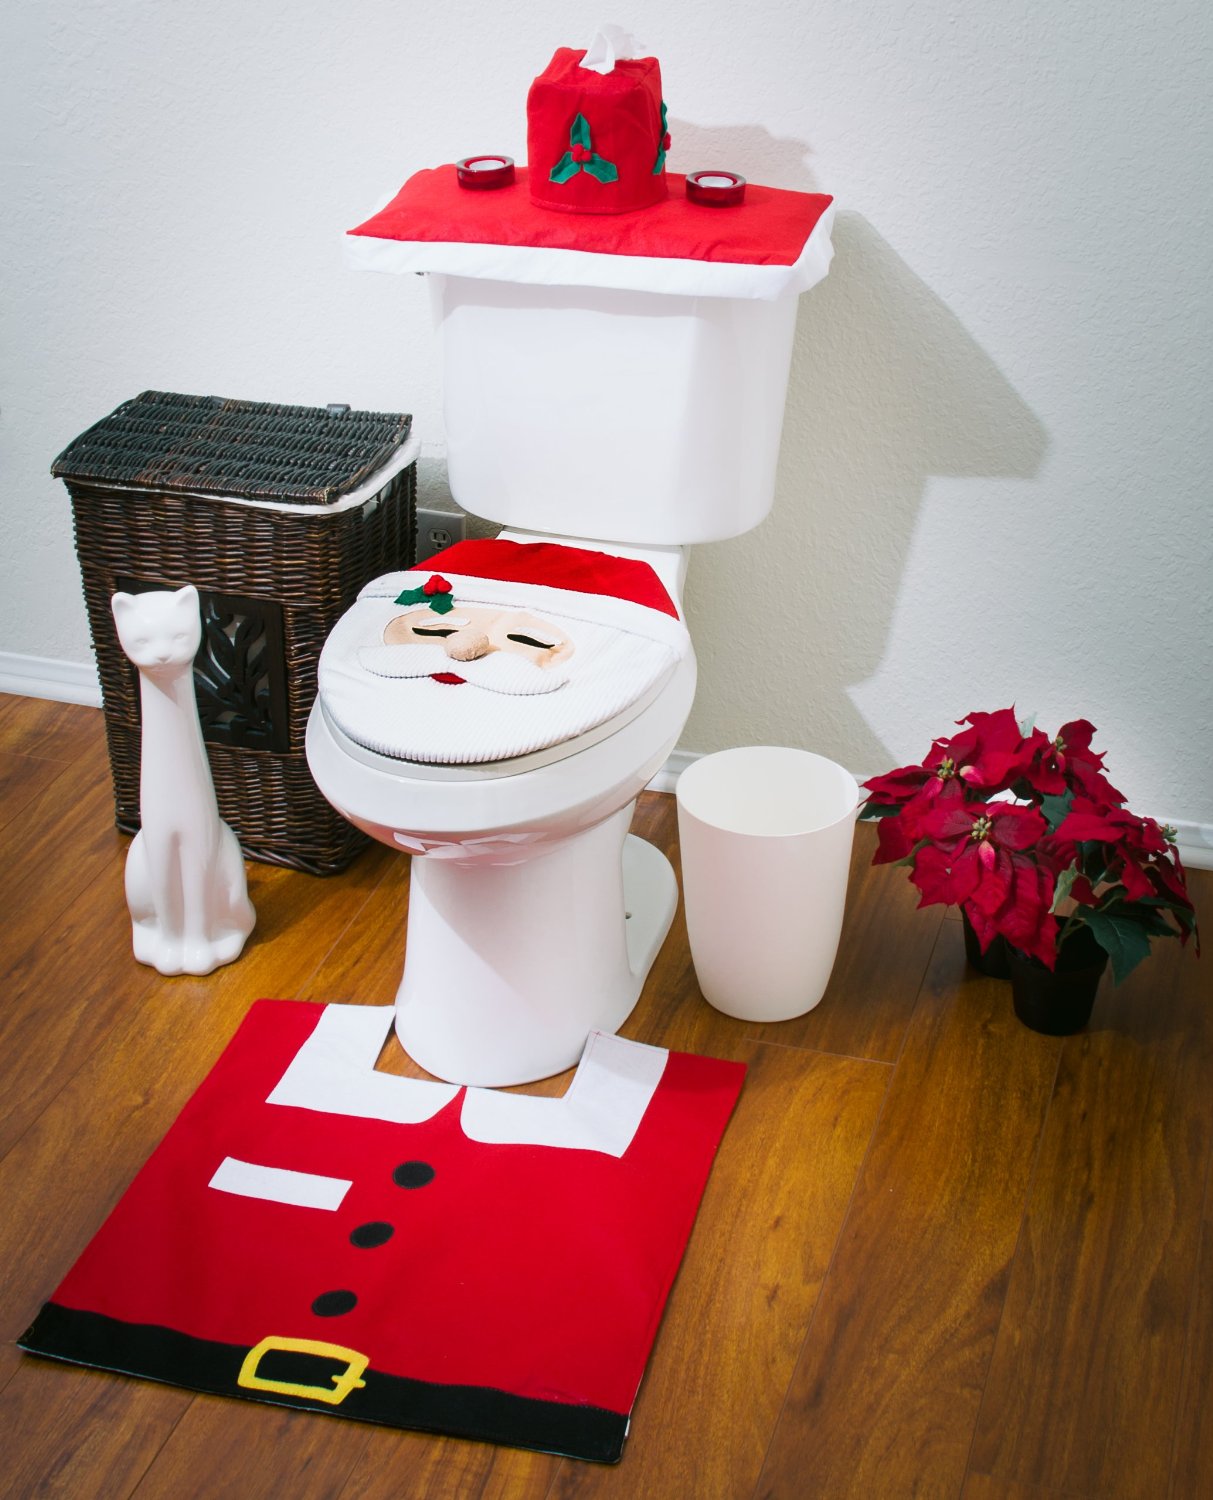 7 OliaDesign Christmas Decorations Happy Santa Toilet Seat Cover and Rug Set